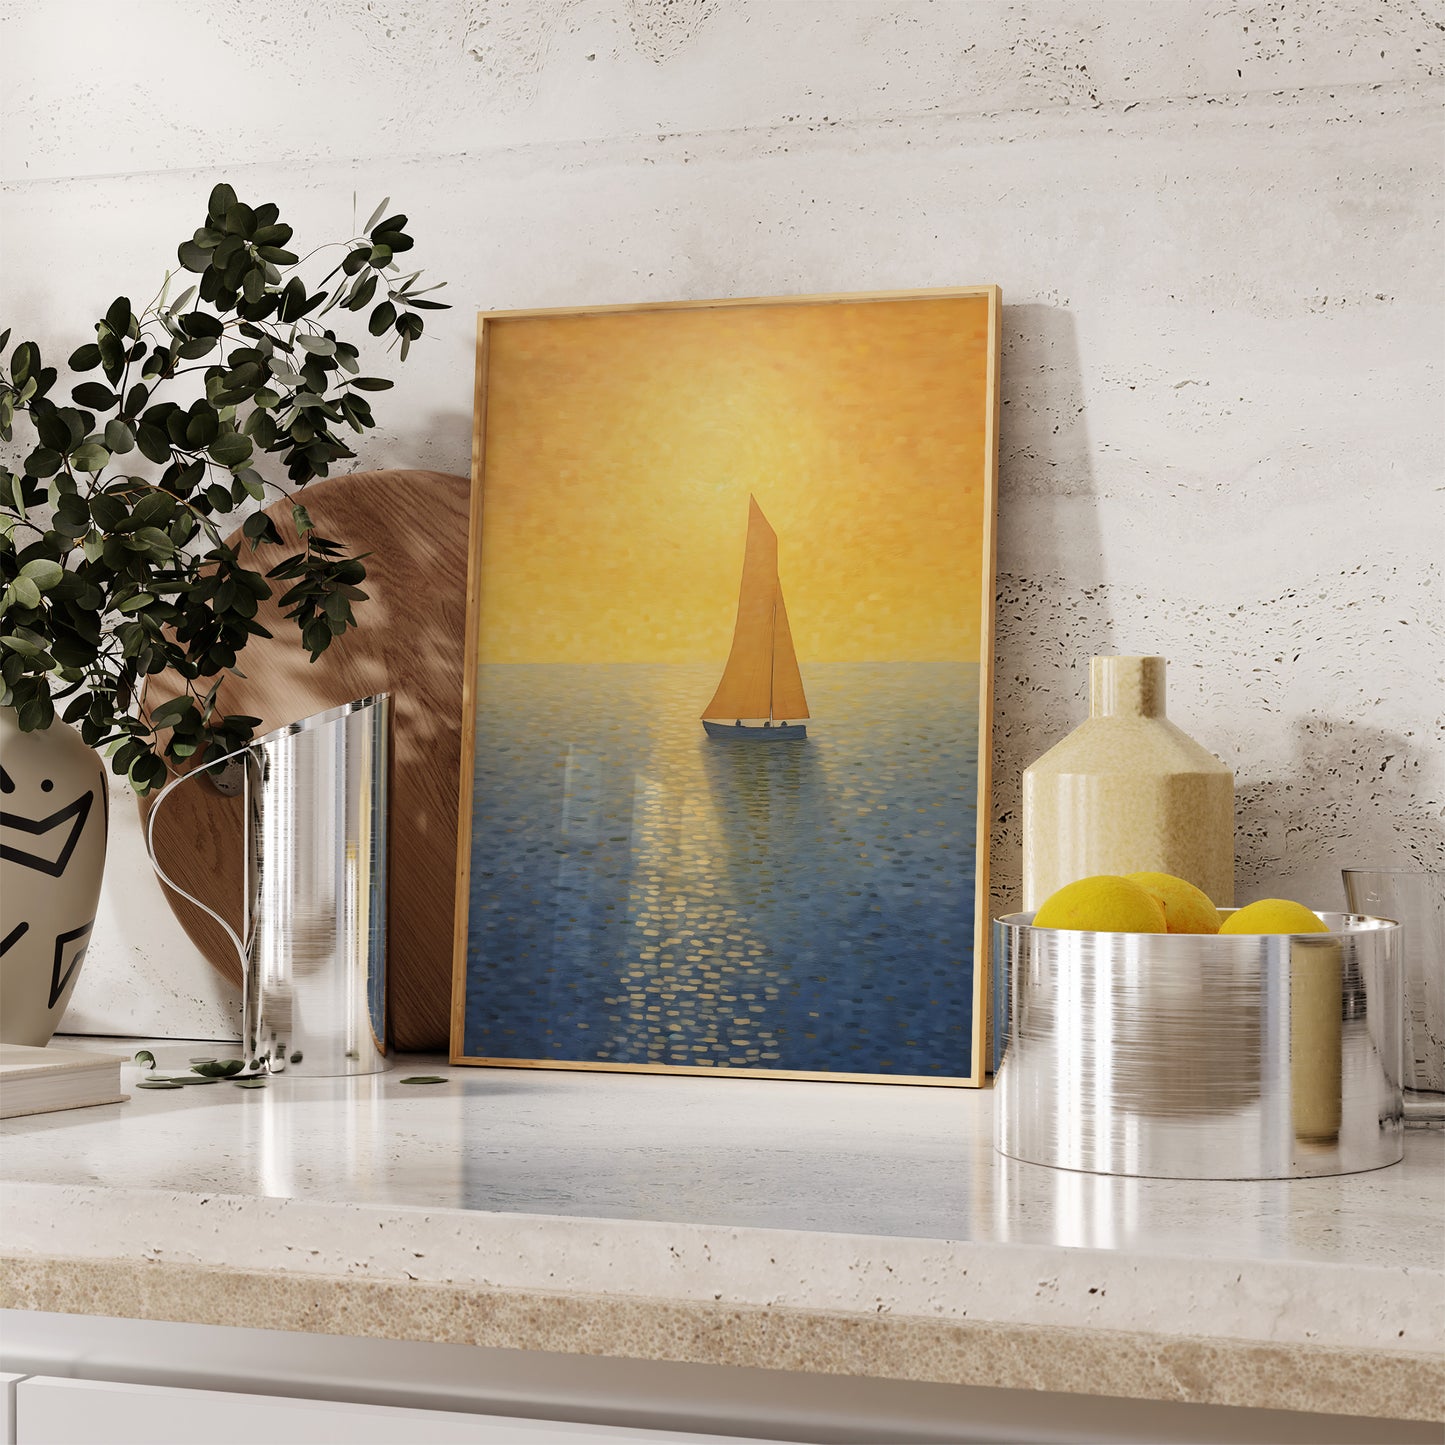 A framed painting of a sailboat at sunset on a kitchen counter, alongside decorative items.